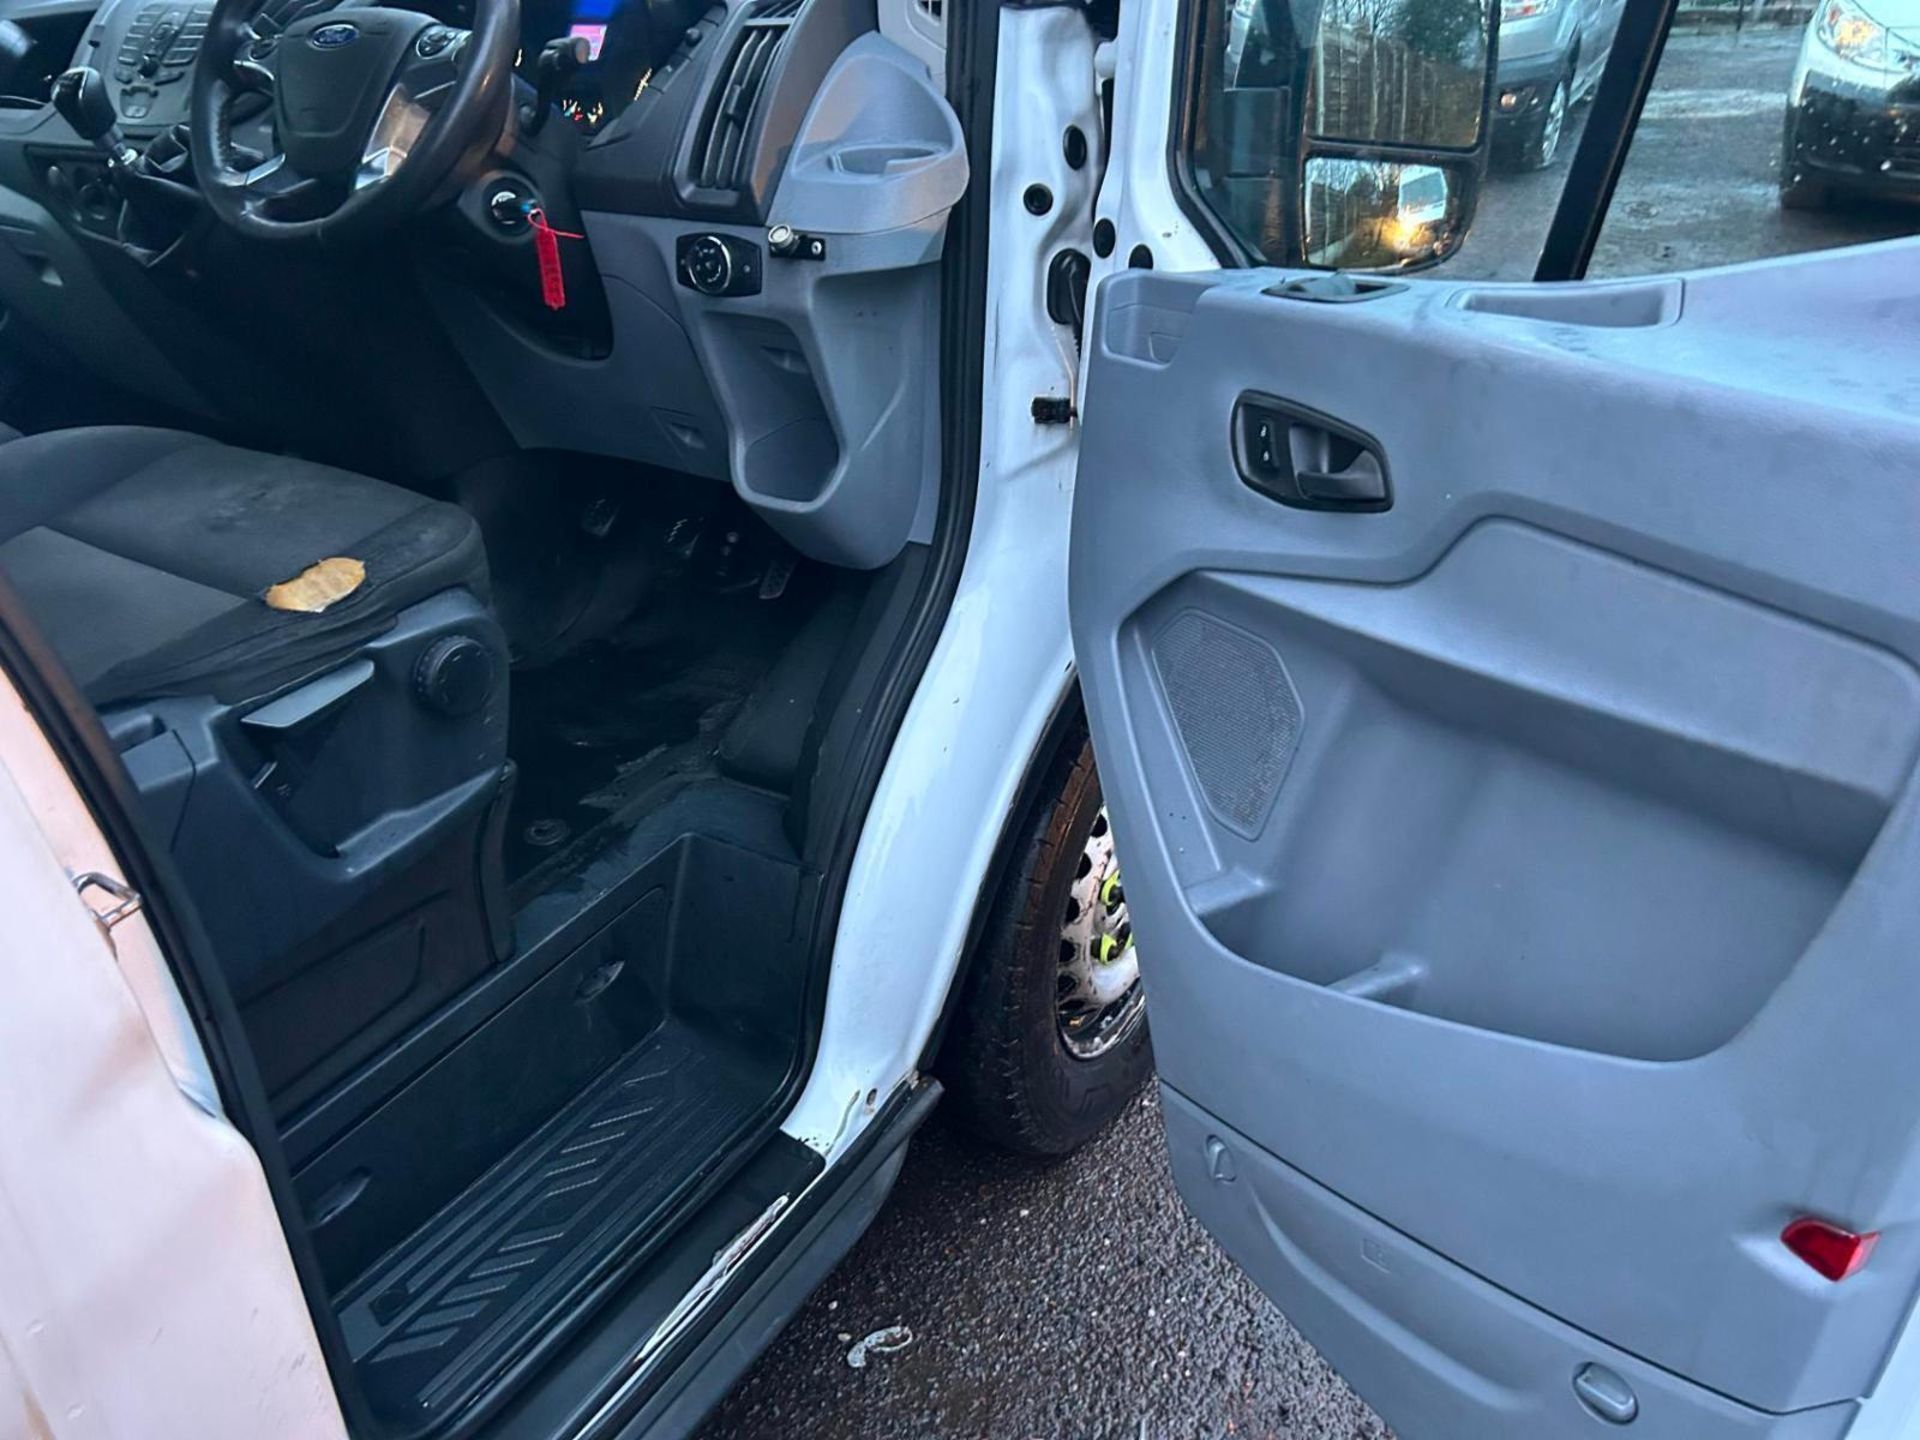 2018 FORD TRANSIT 2.0 TDCI 130PS L3 H3 - RELIABLE AND EFFICIENT PANEL VAN! - Image 7 of 14